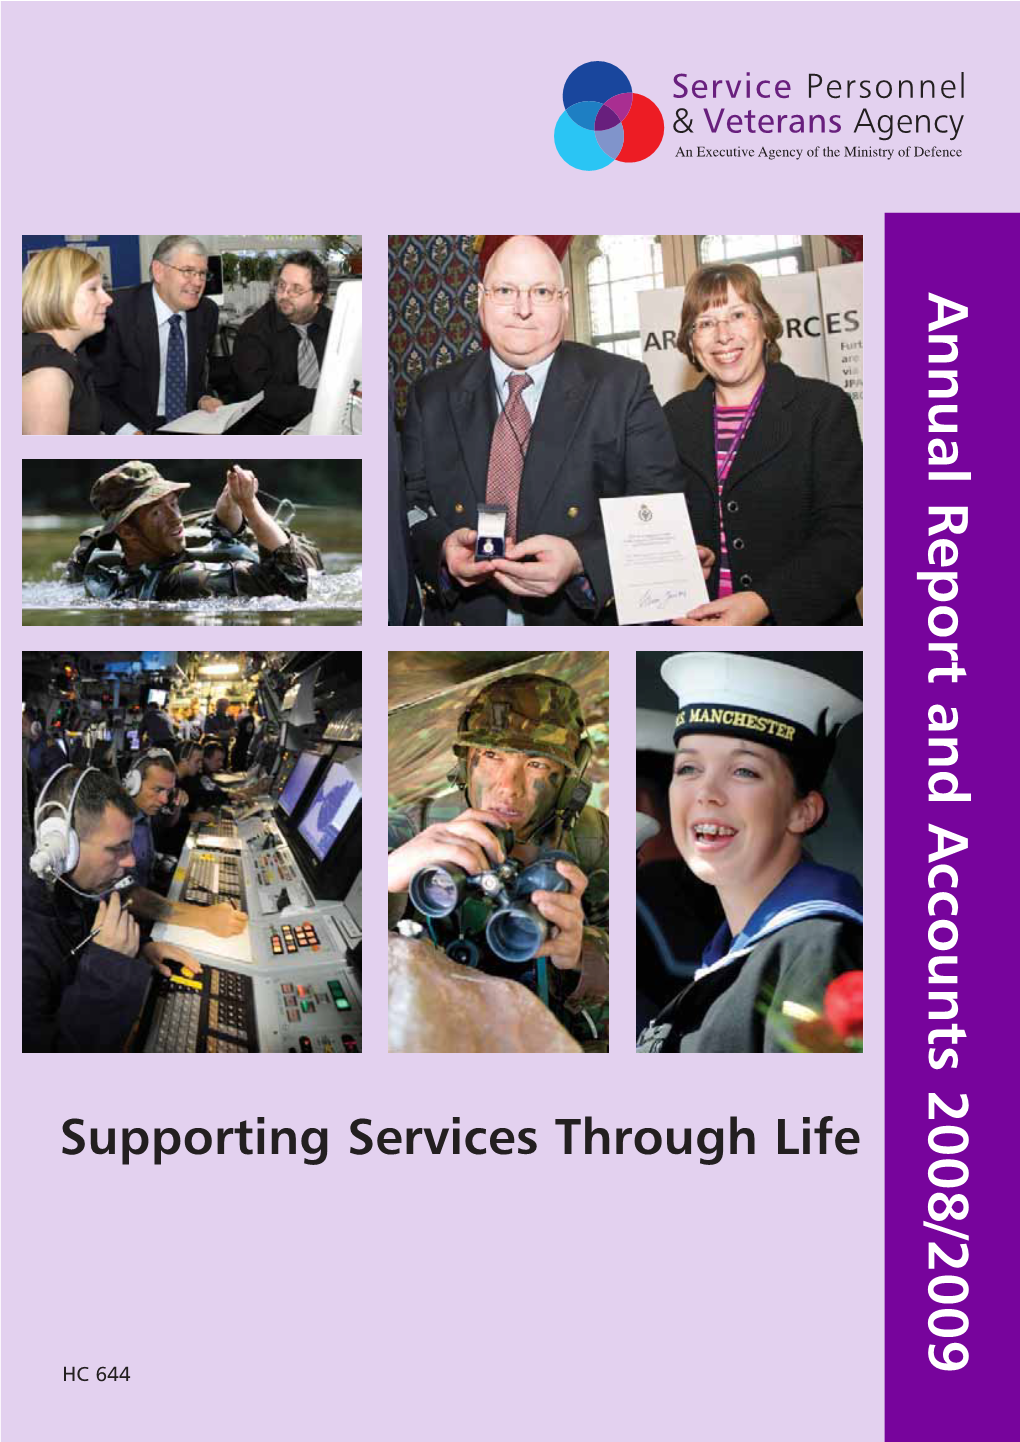 Annual Report and Accounts 2008/2009